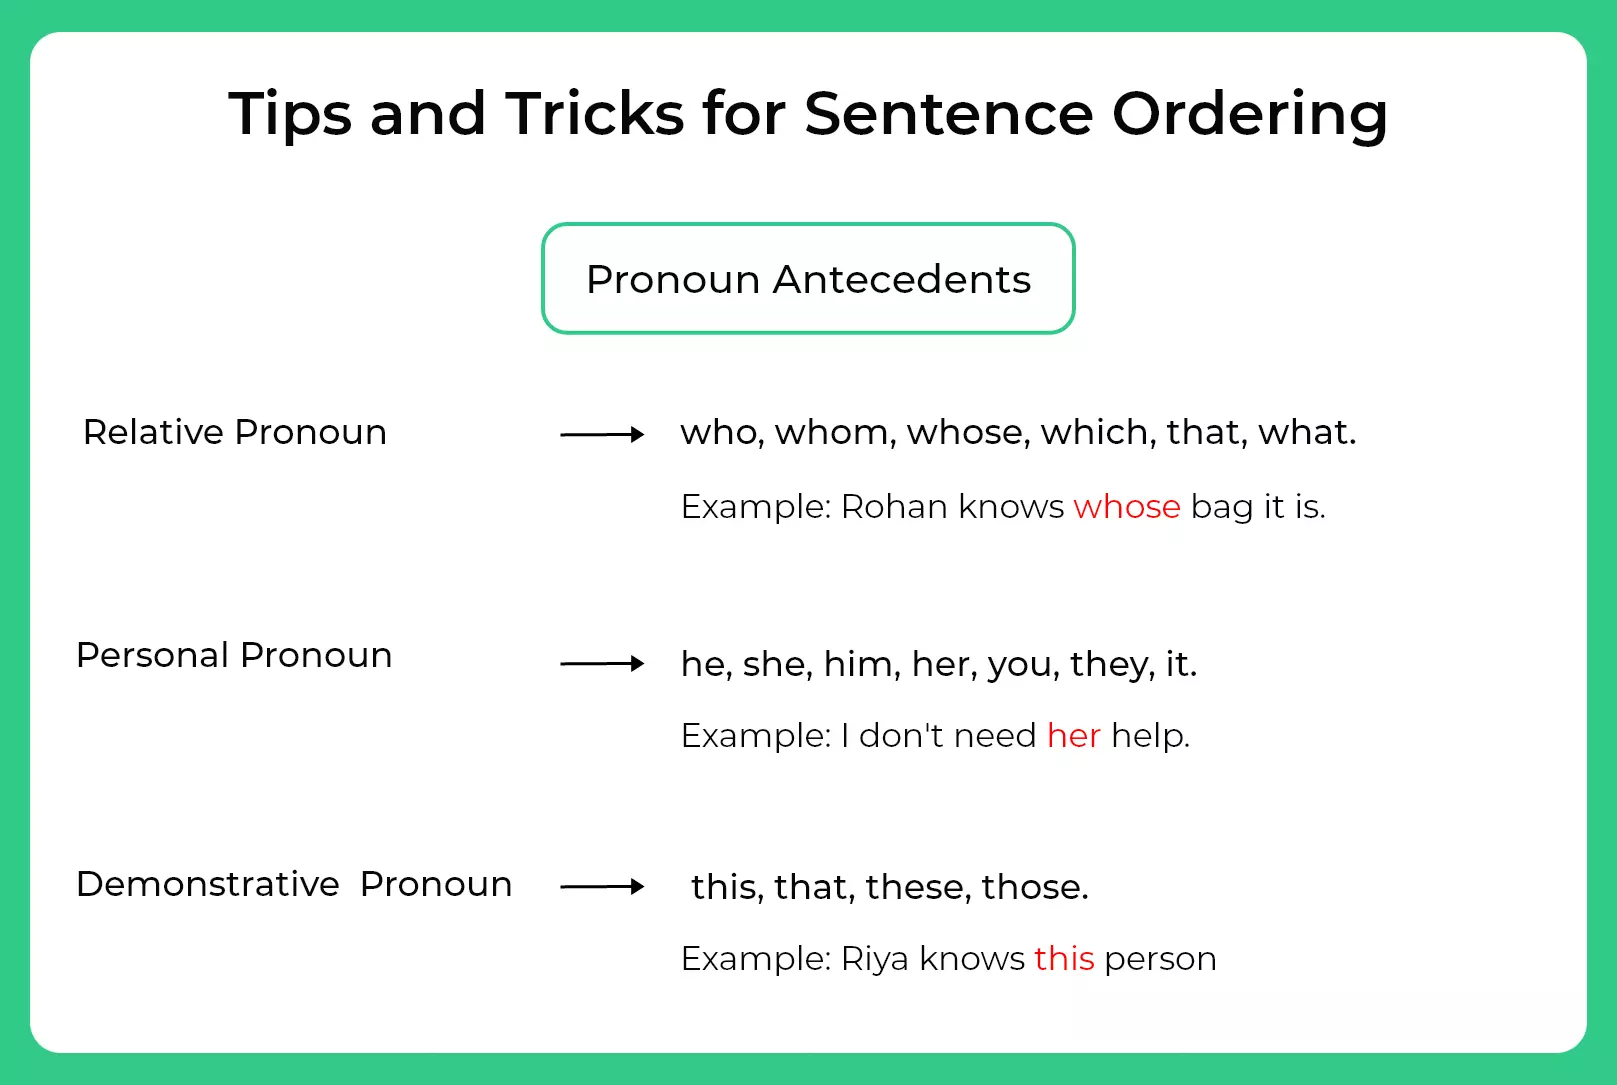 Tips and Tricks for Sentence Ordering